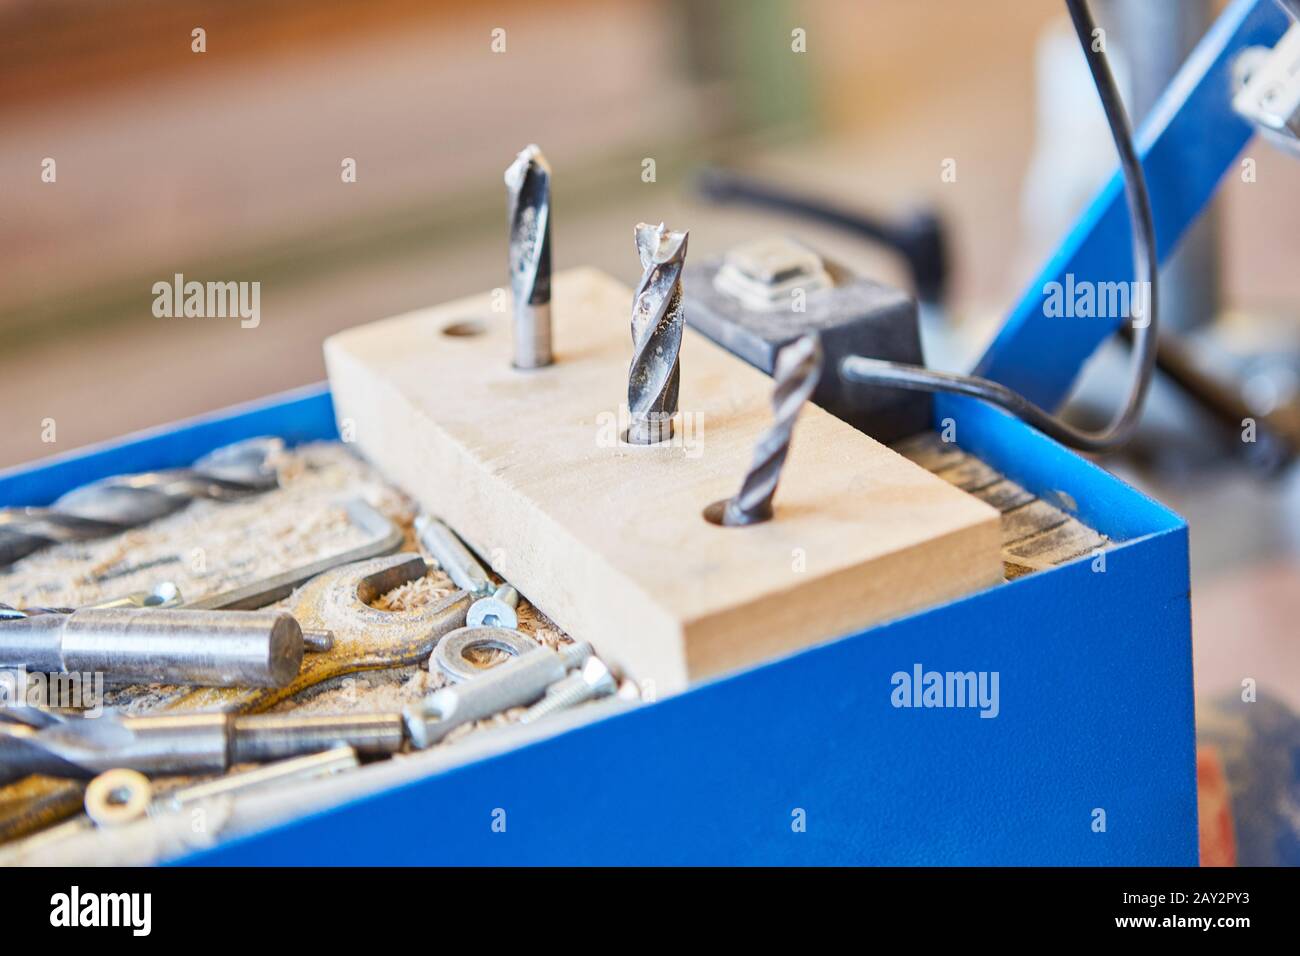 Various twist drills in a carpentry or carpentry workshop Stock Photo